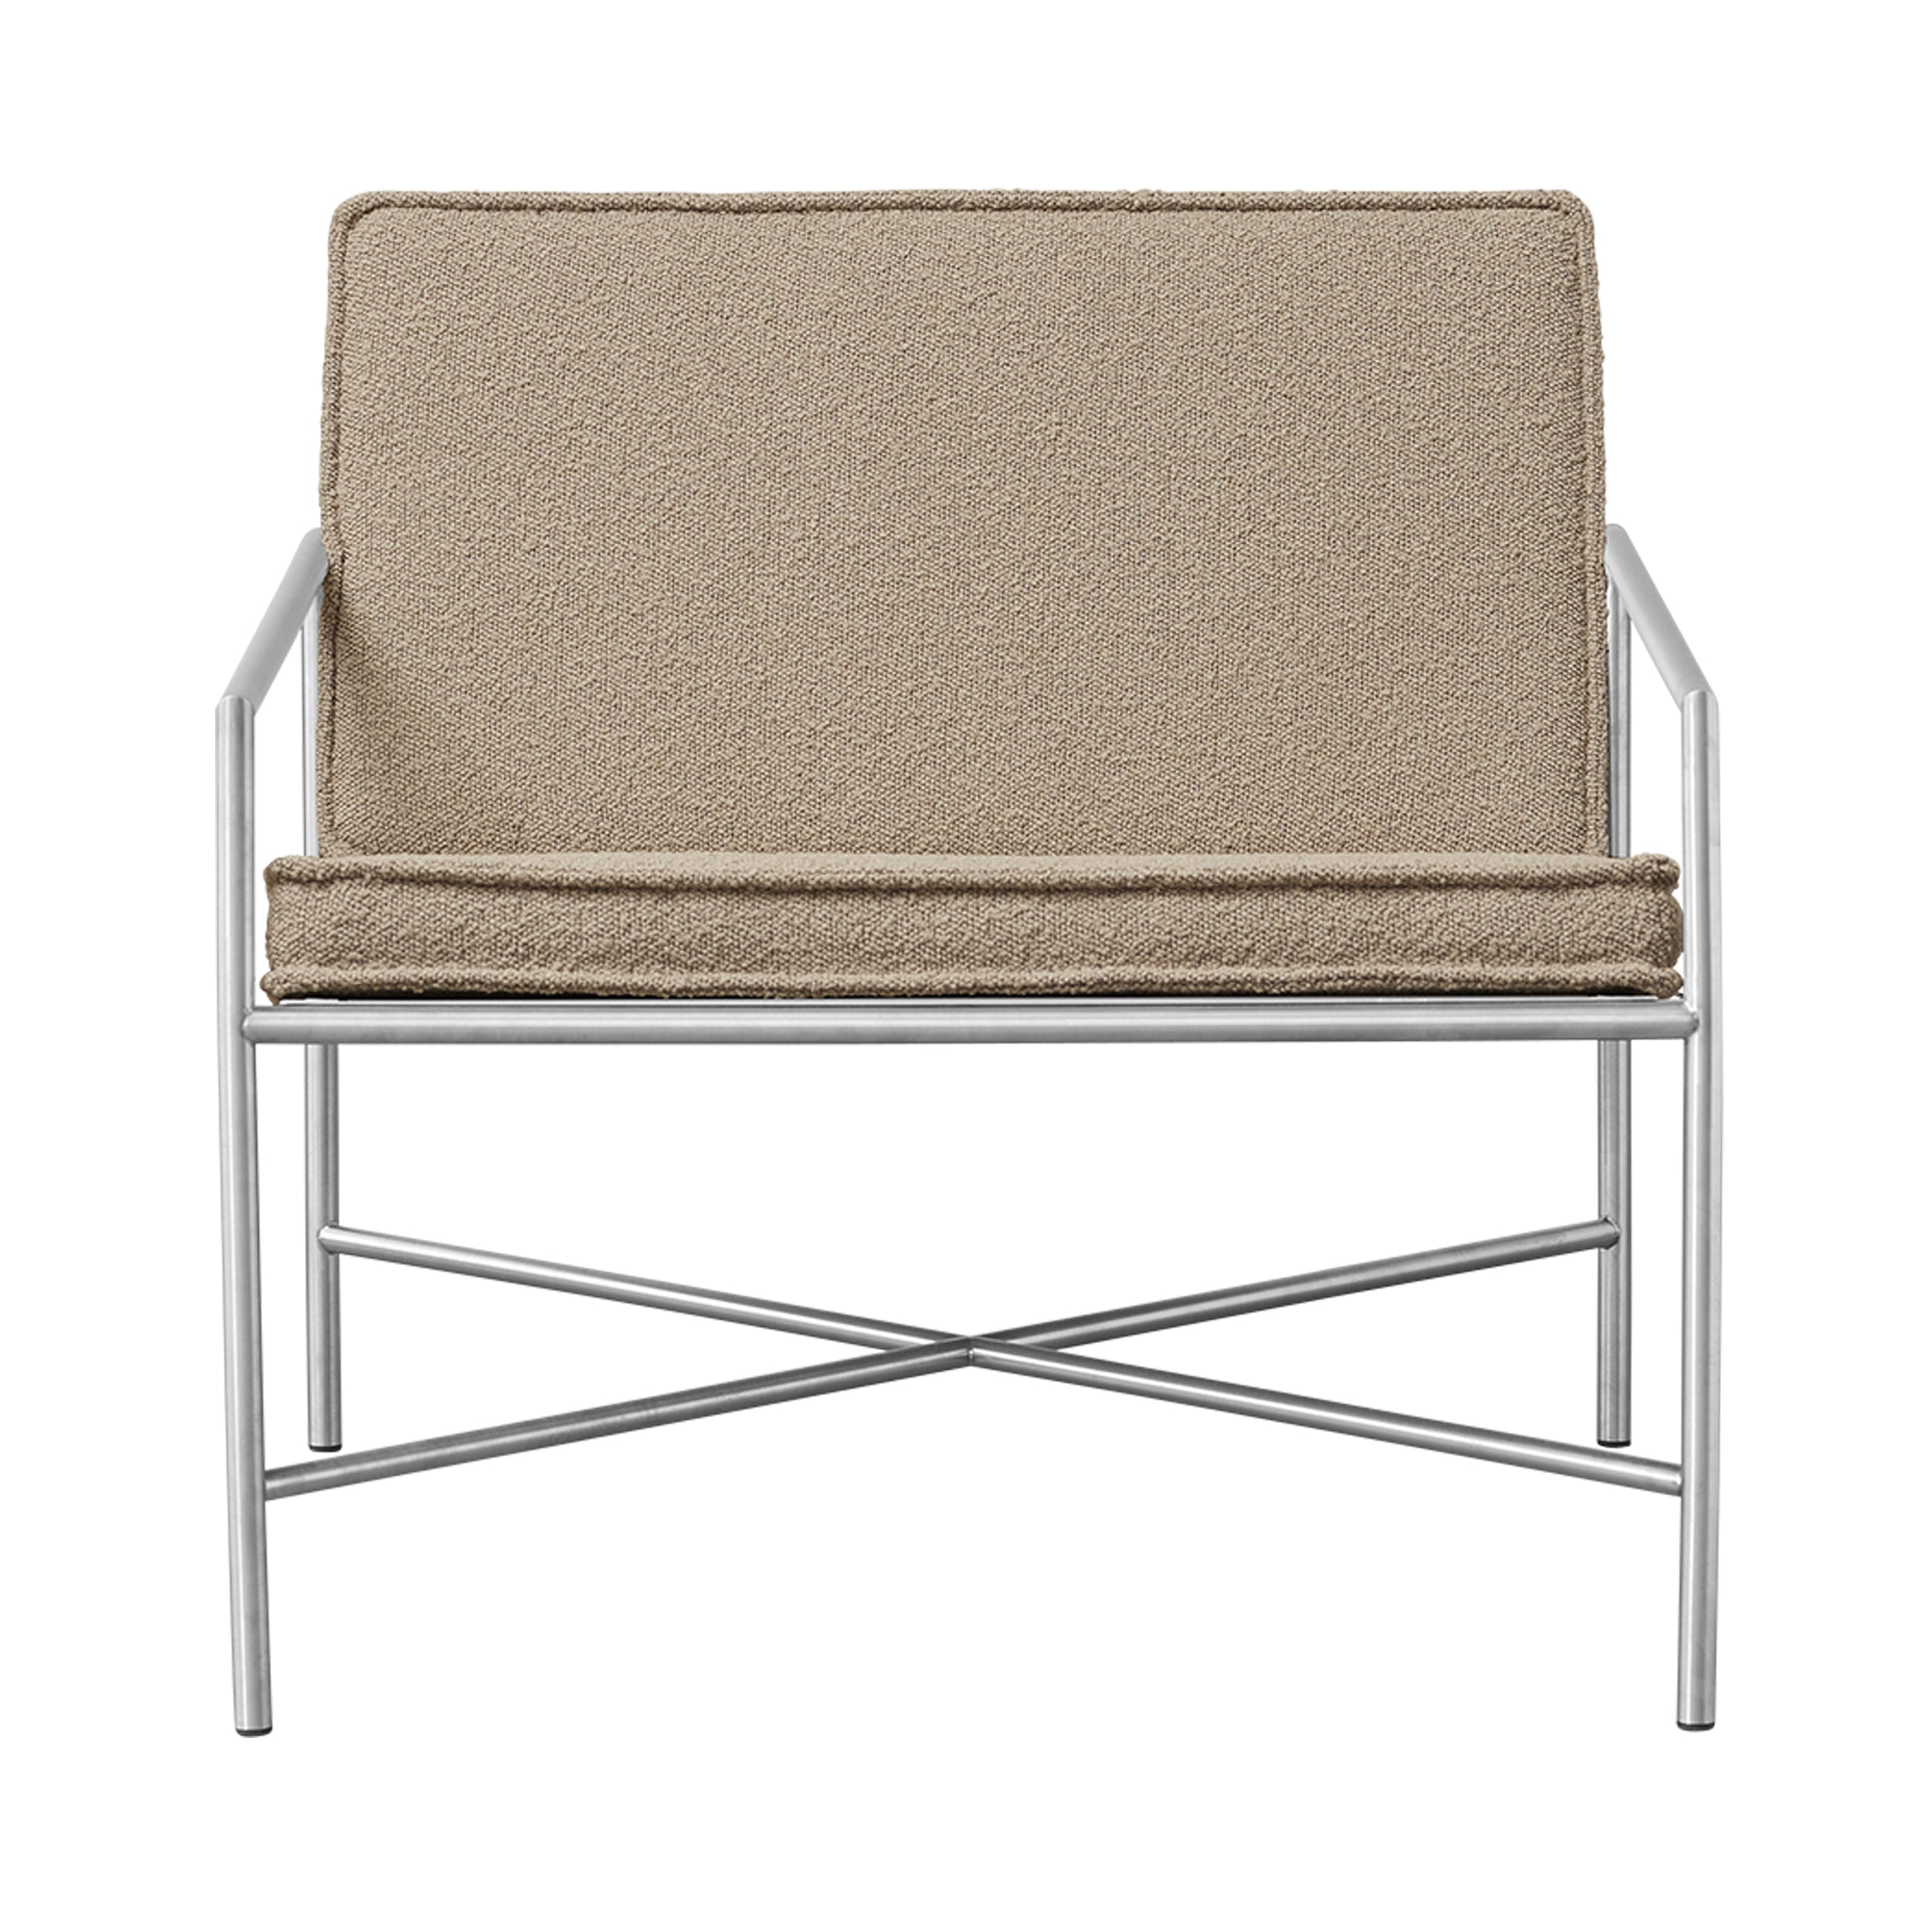 Lounge Chair: Stainless Steel